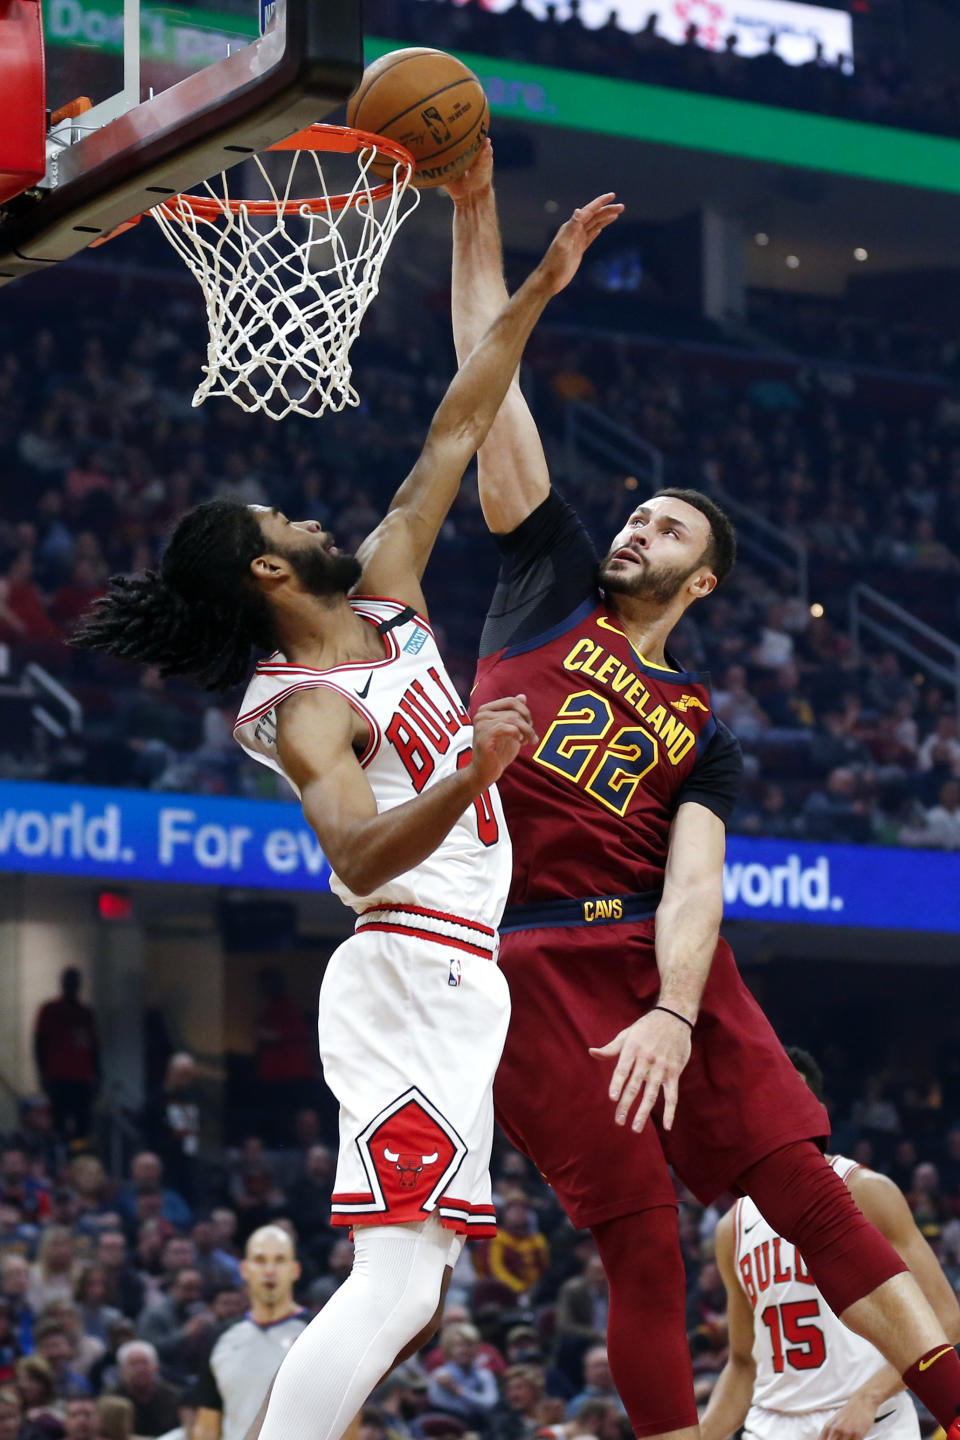 Cleveland Cavaliers' Larry Nance Jr. (22) dunks against Chicago Bulls' Coby White (0) in the first half of an NBA basketball game, Saturday, Jan. 25, 2020, in Cleveland. (AP Photo/Ron Schwane)